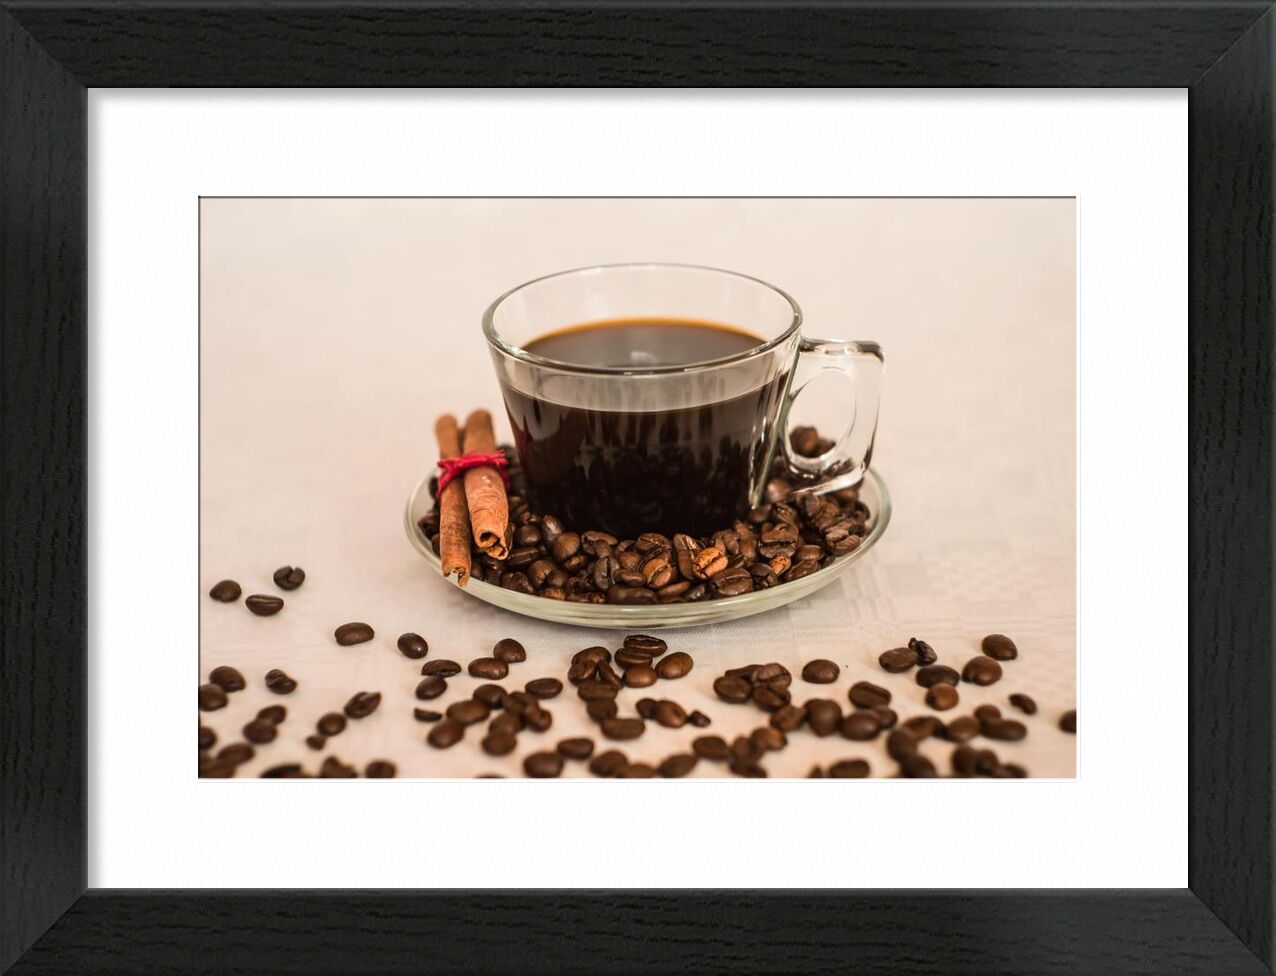 A cup and its beans from Pierre Gaultier, Prodi Art, beverage, cup, coffee beans, coffee, caffeine